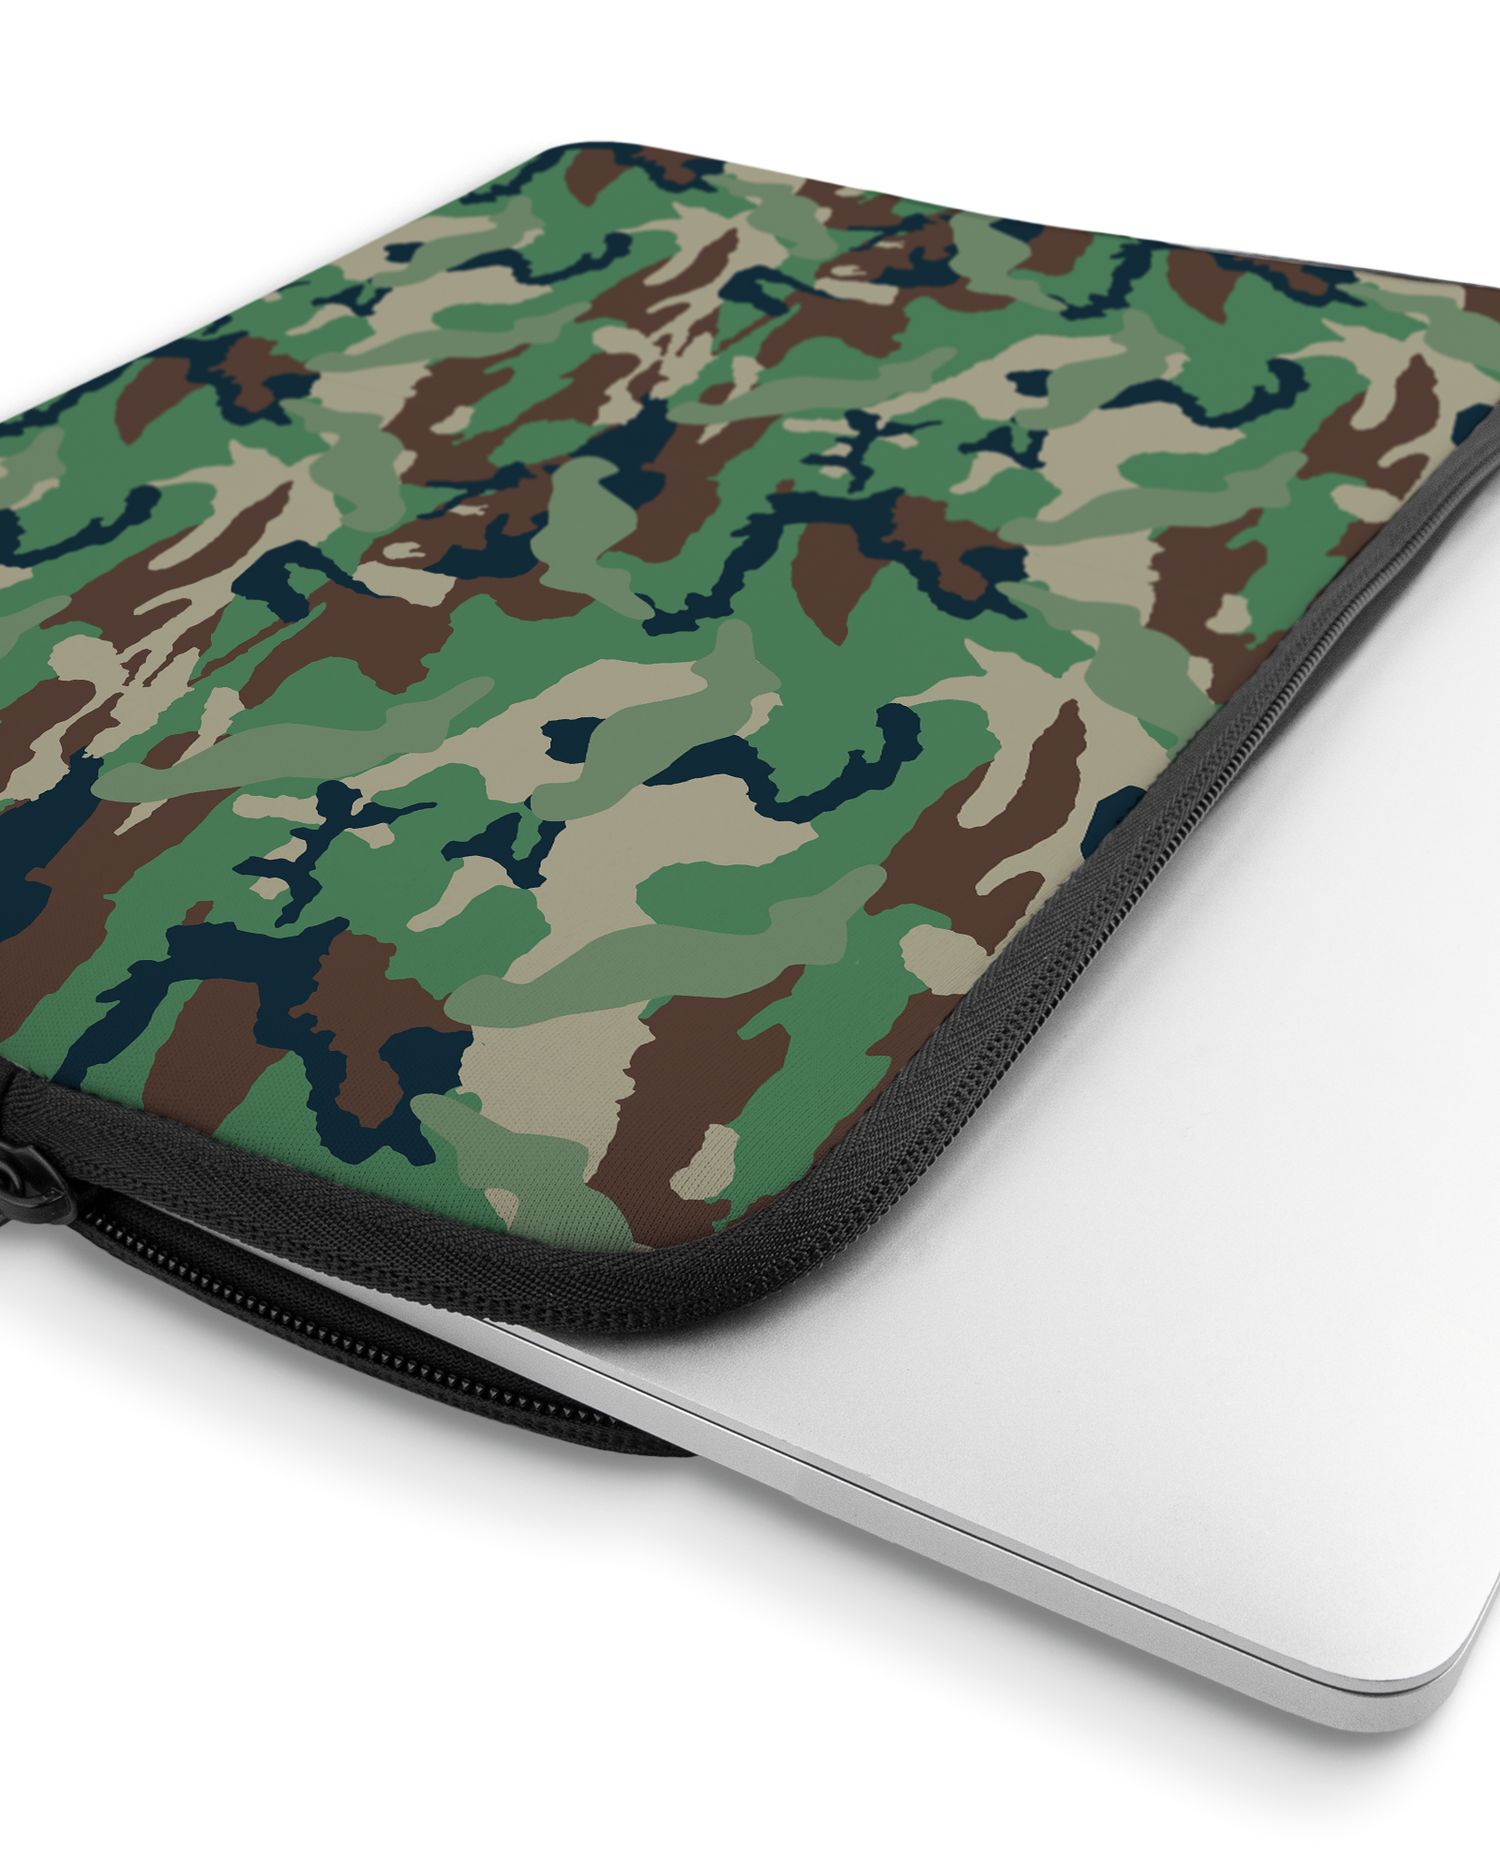 Green and Brown Camo Laptop Case 13 inch with device inside